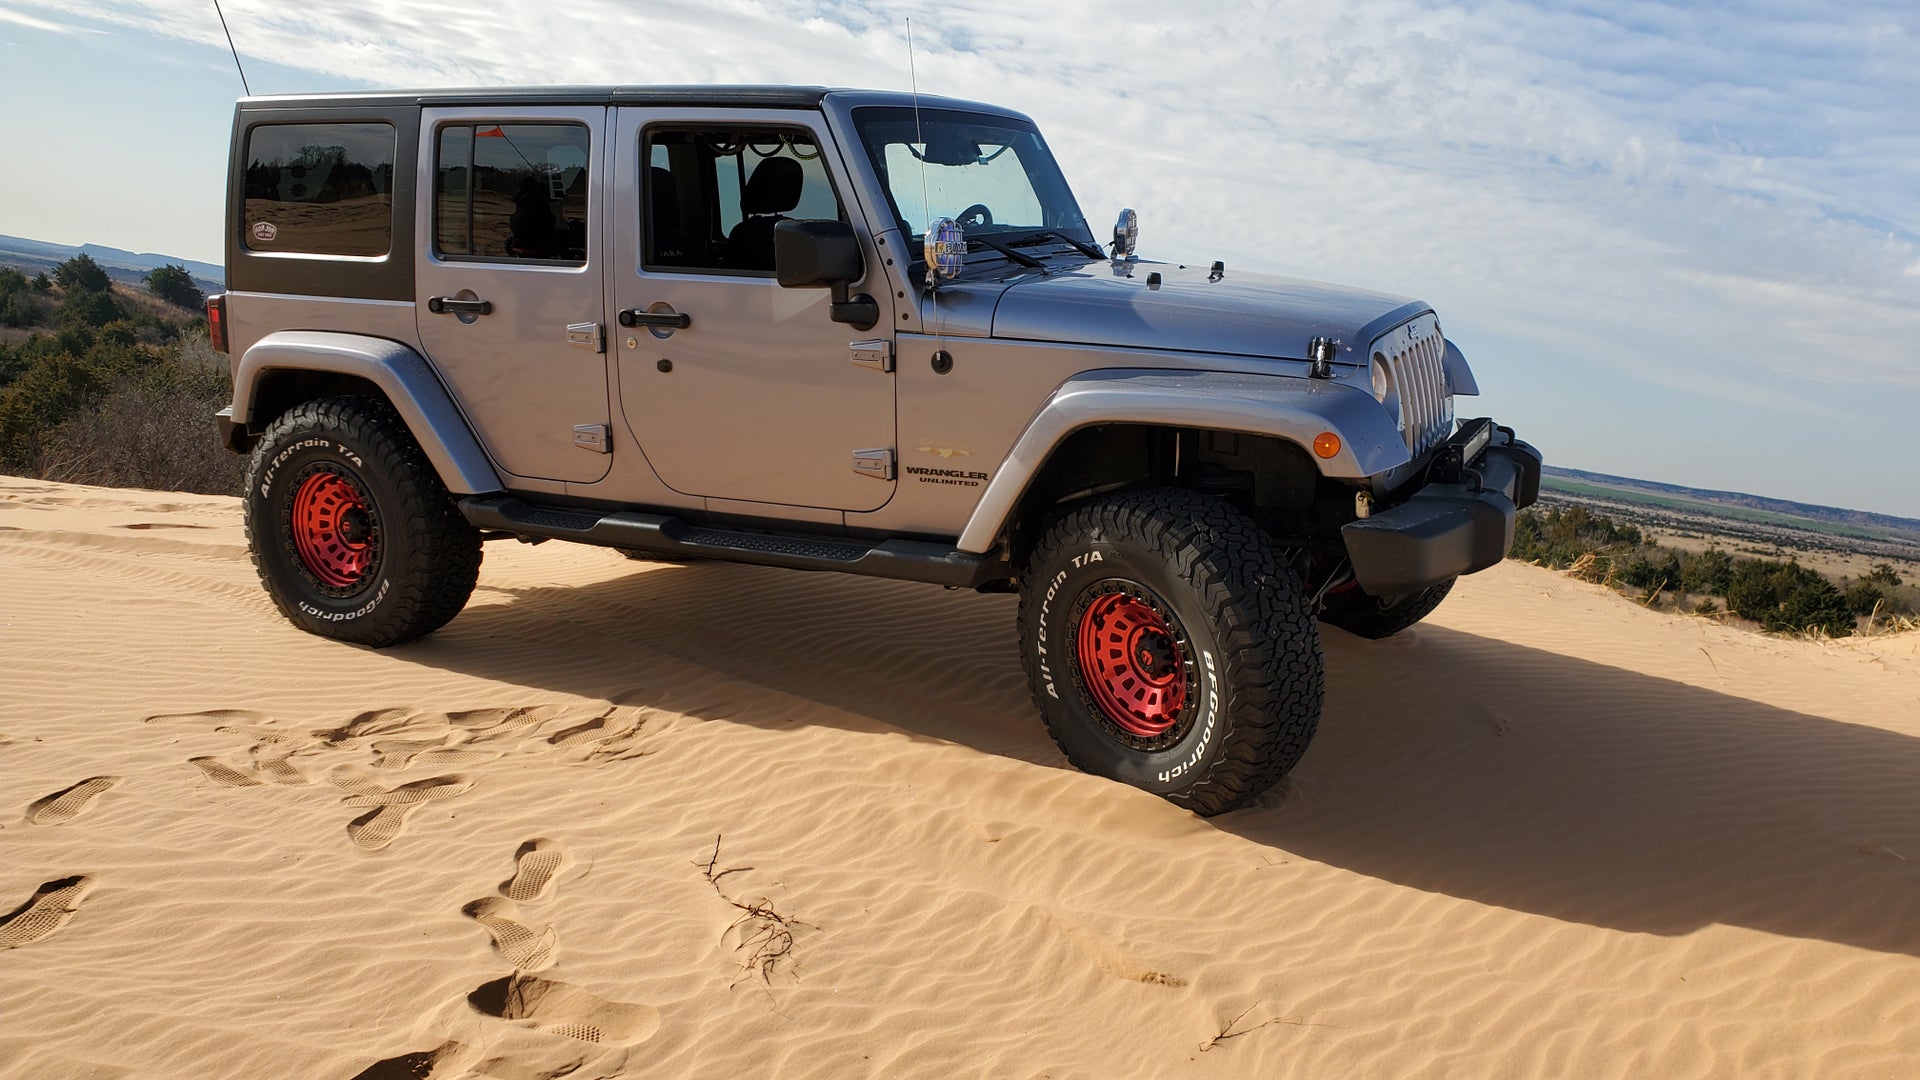 2014 JKU is overheating on the Highway after lift kit | Jeep Wrangler Forum